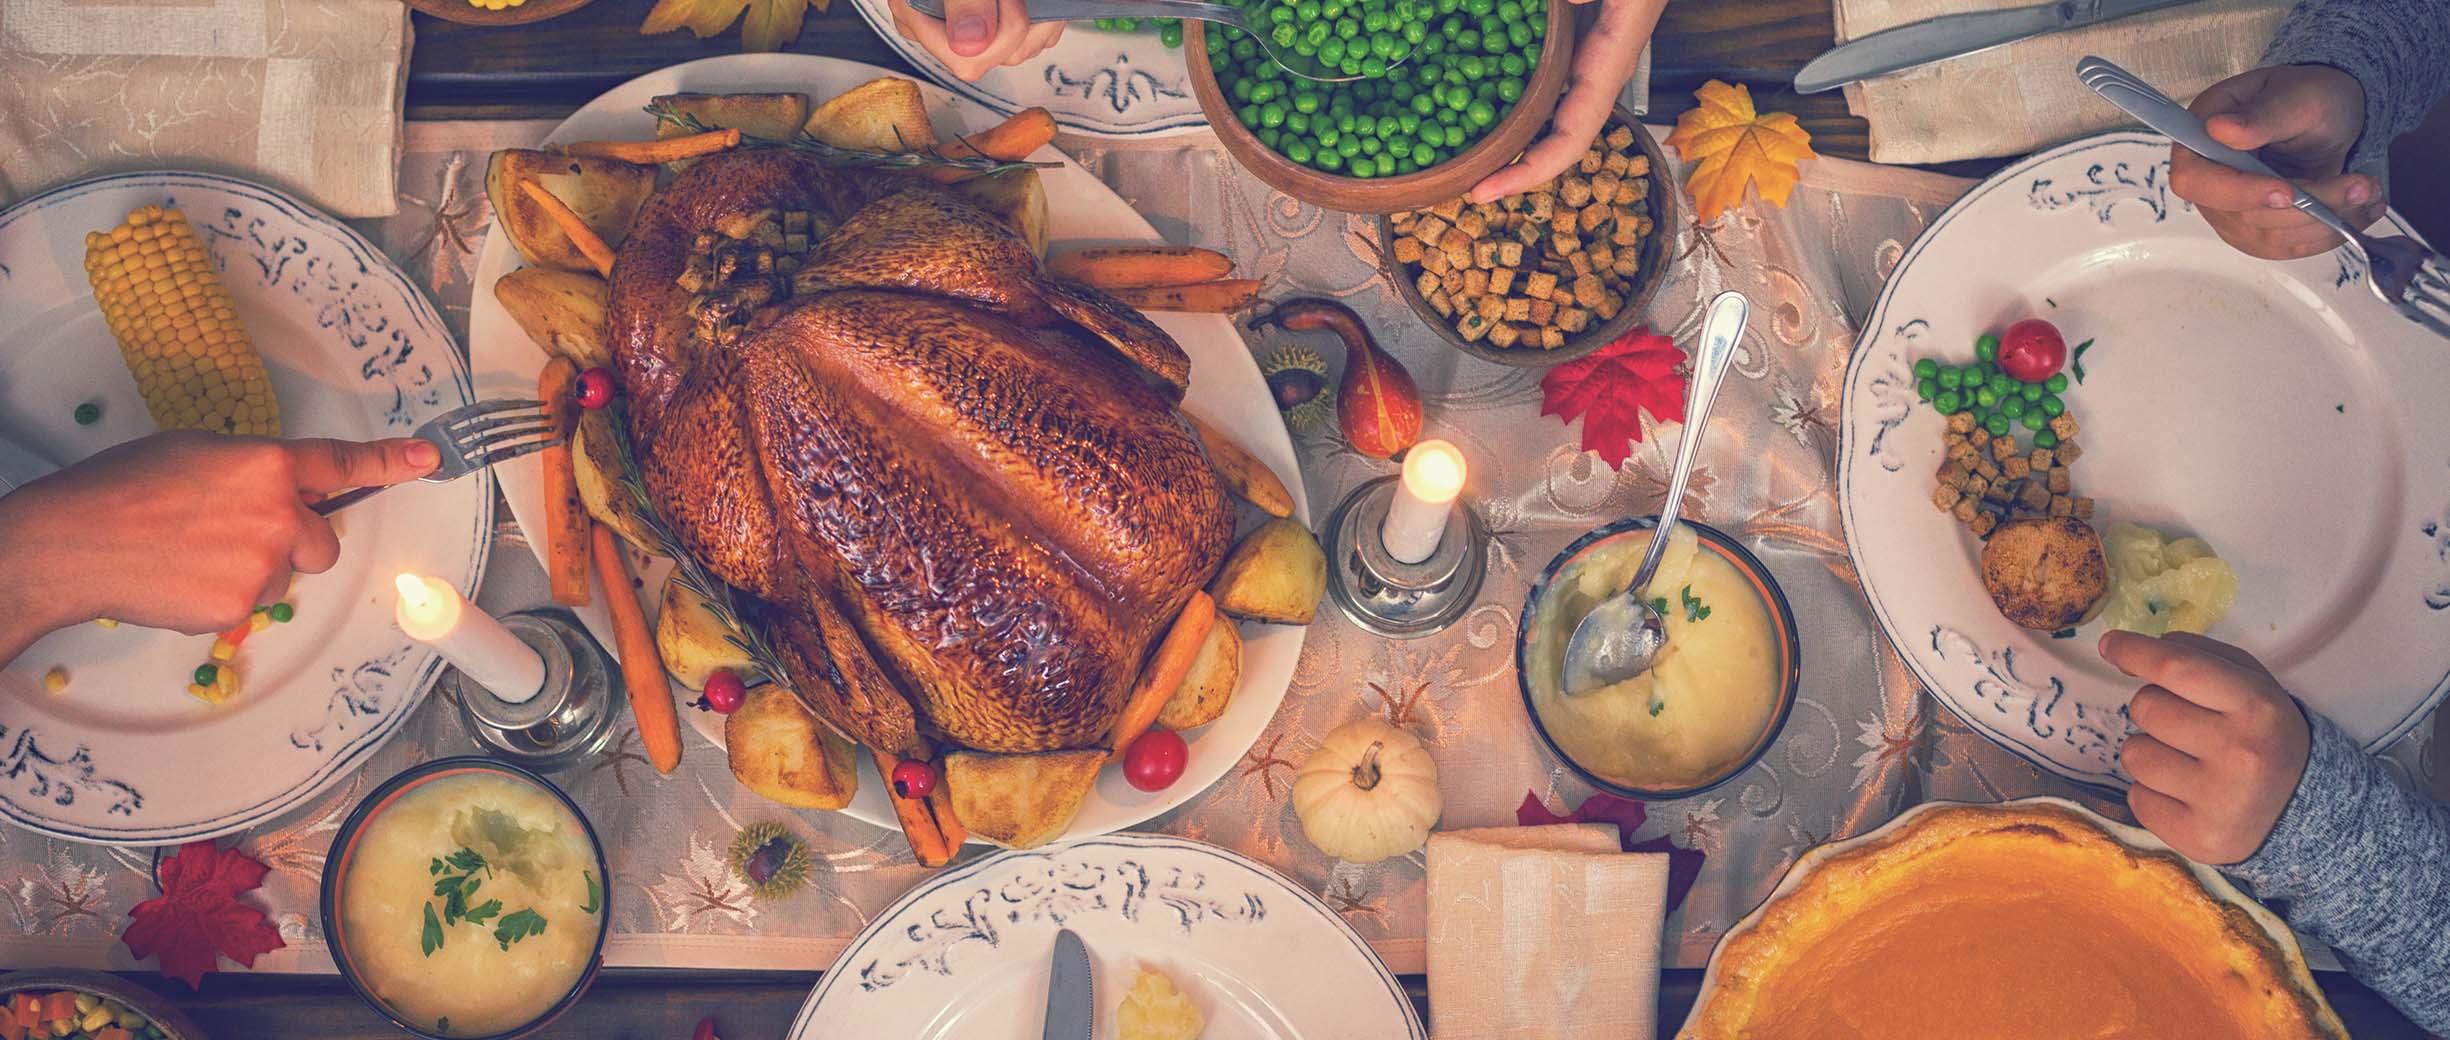 10 Last-Minute Thanksgiving Recipes That Are Easy on the Budget